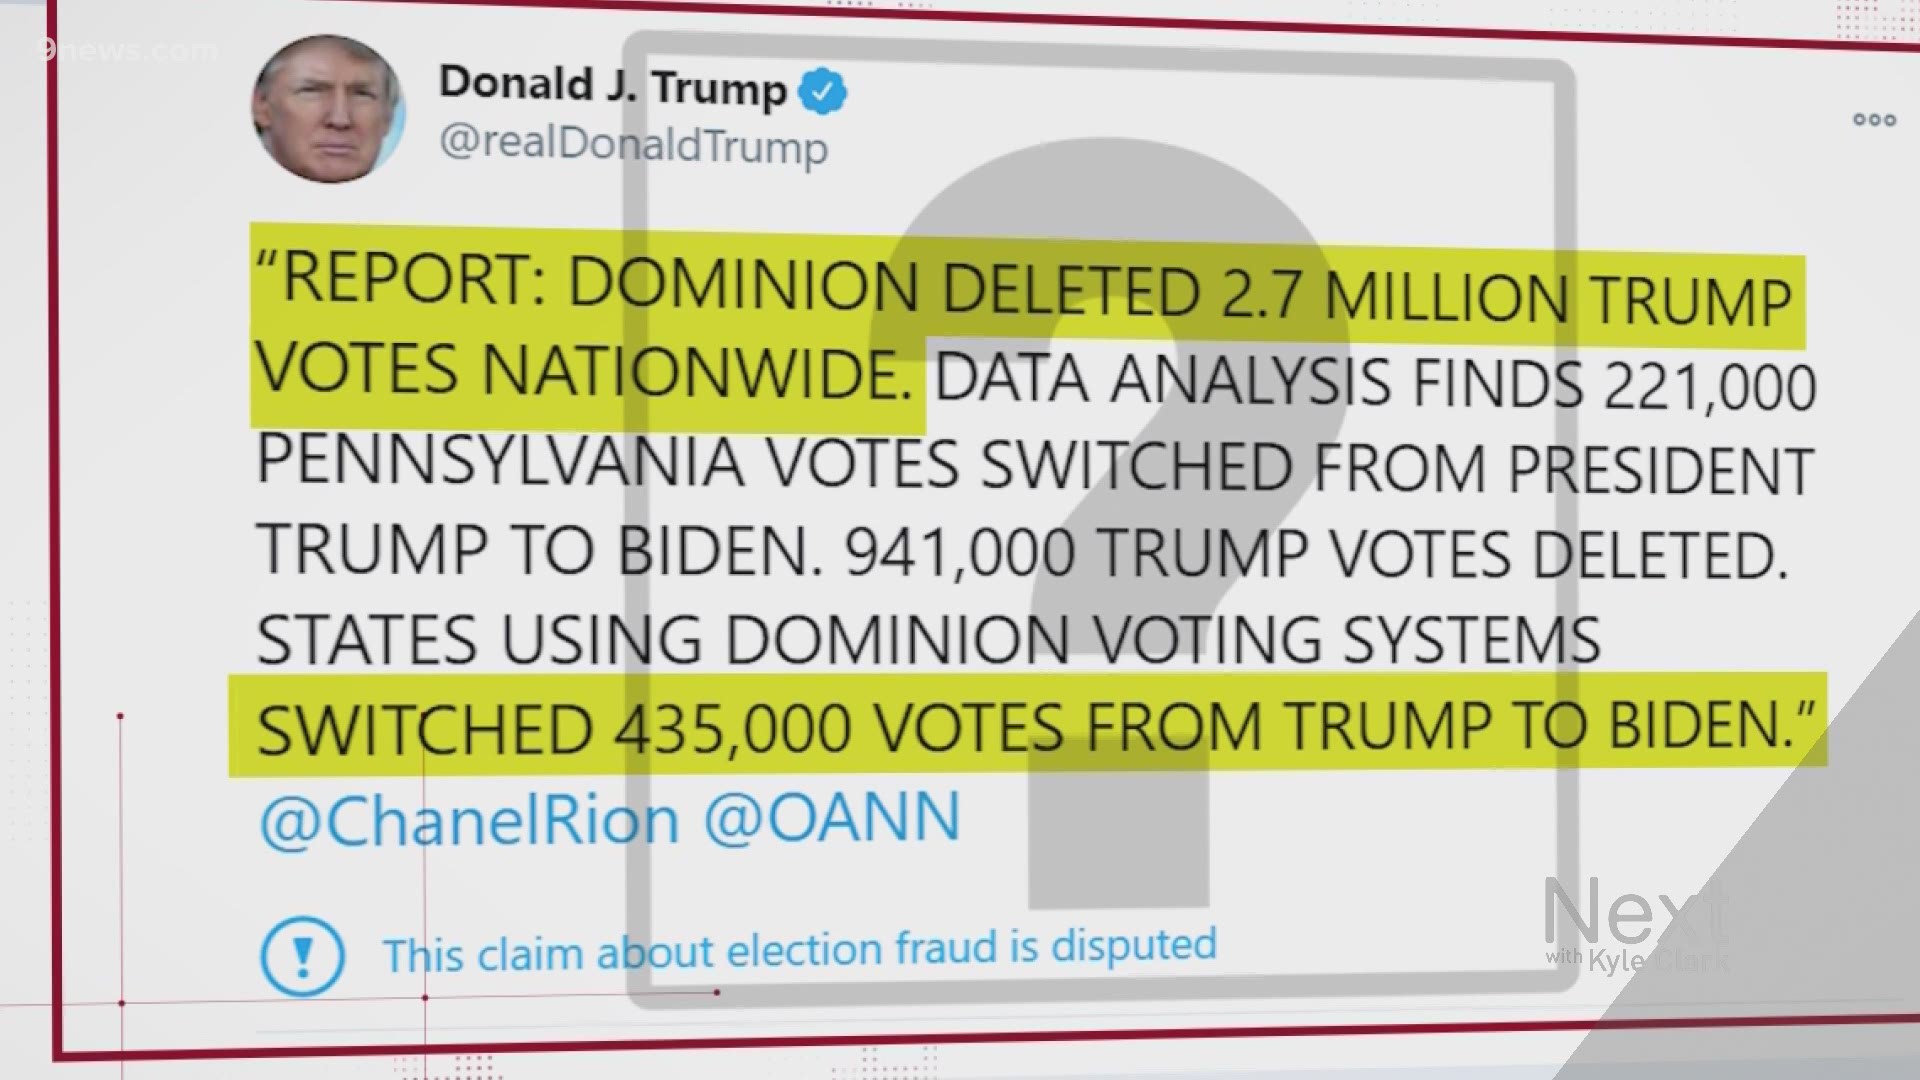 Eric Coomer, Director of Product Security and Strategy for Dominion Voting Systems, filed a lawsuit against the Trump campaign and others related to the threats.